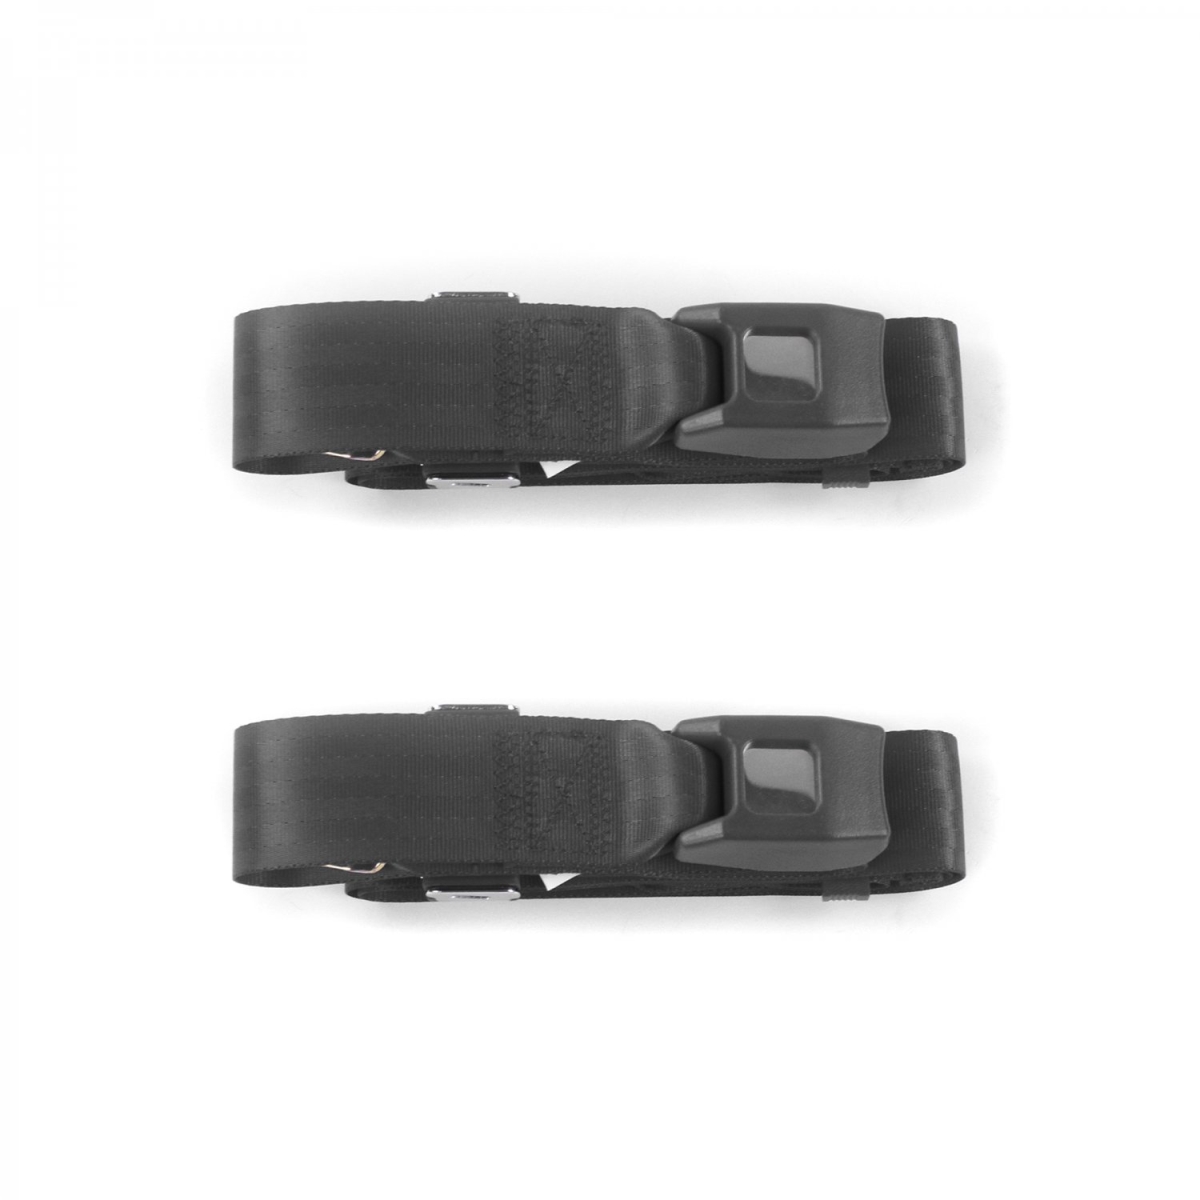 Standard 2 Point Charcoal Lap Bucket Seat Belt Kit with 2 Belts for 1975-1982 Triumph TR7, 8 -  Geared2Golf, GE1353358